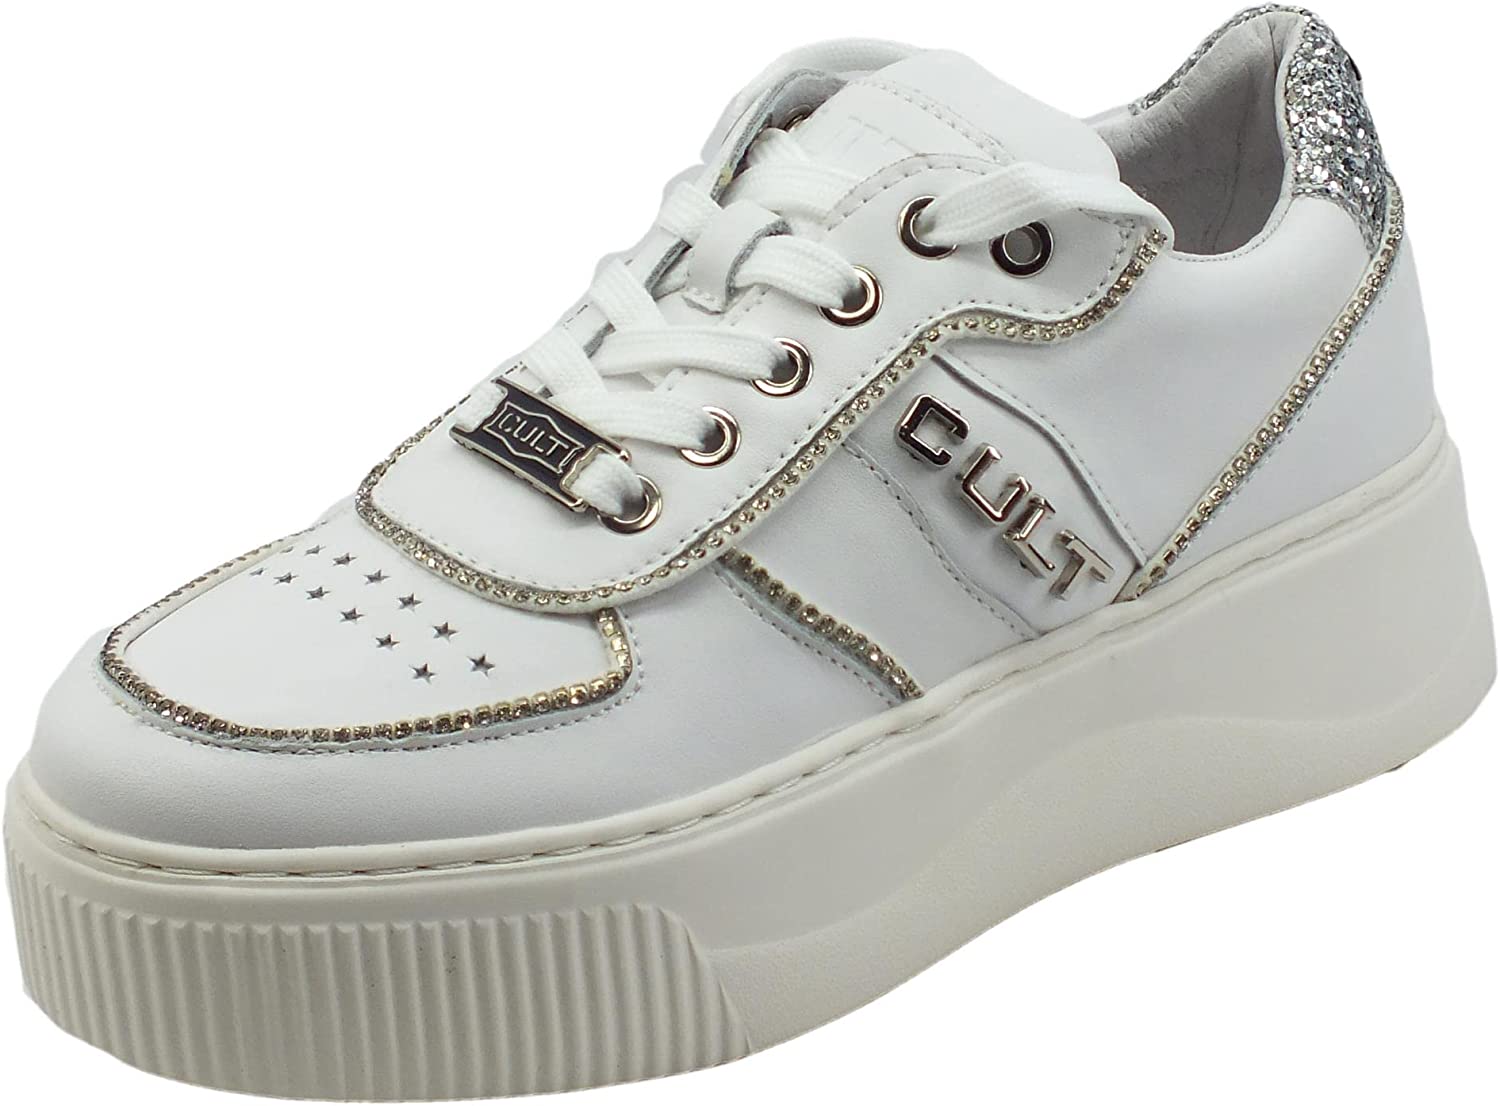 Sneakers Cult Donna Bianca